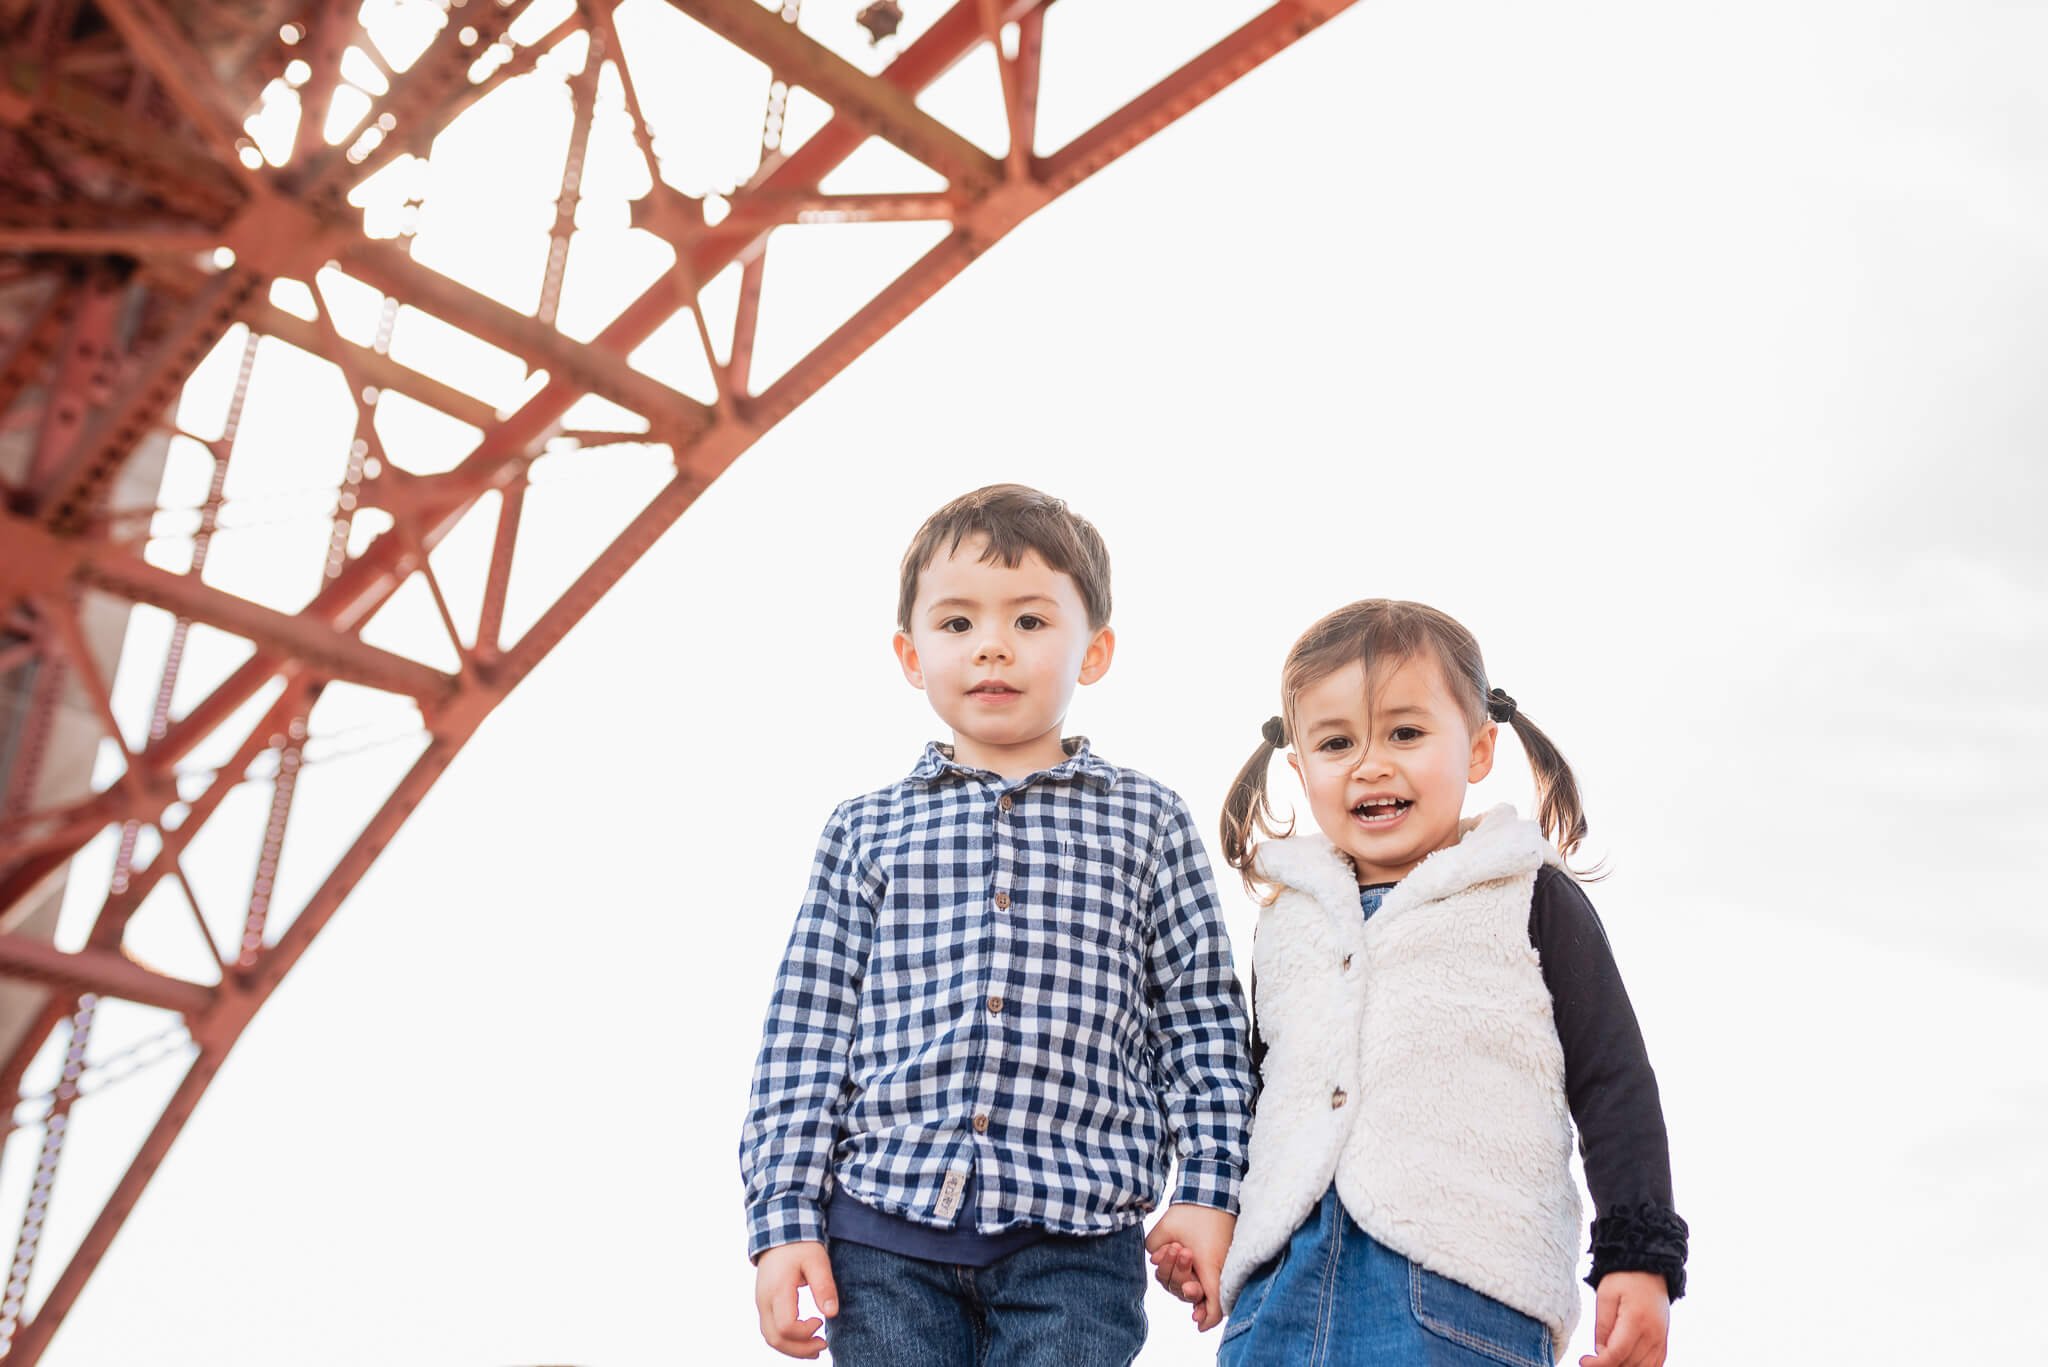 Kristin_Lunny_Photography_Families_Marin_Mill_Valley_San Francisco-1-9.jpg